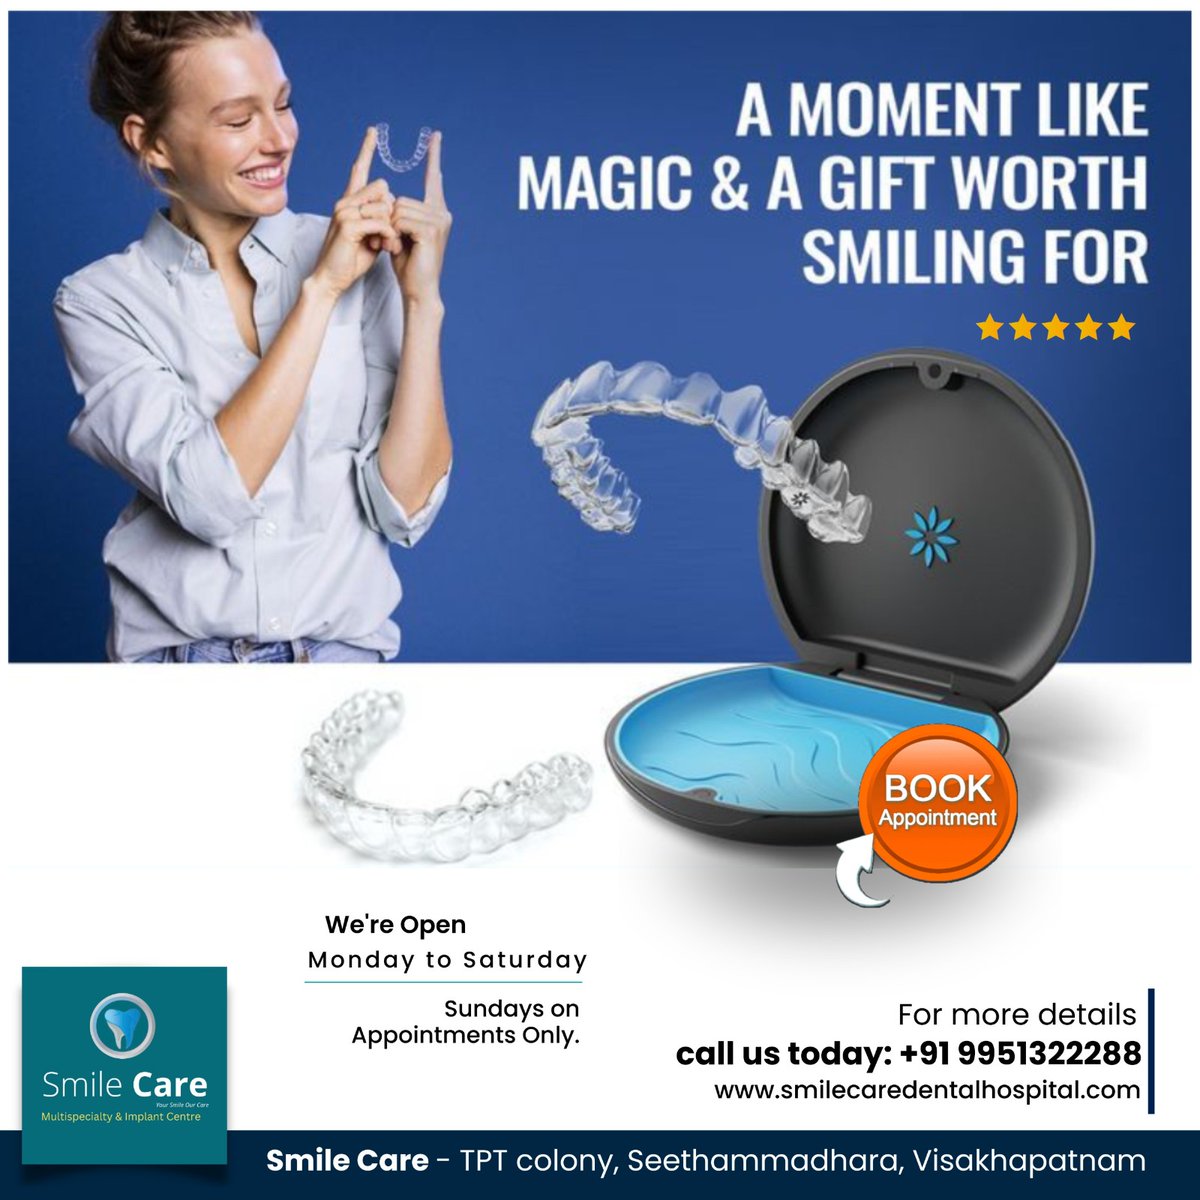 ✨ A moment like magic, and a gift worth smiling for! 

For more details, call us today:
📞 +91 9951322288
🌐 lnkd.in/gPncF4yU

#SmileMagic #DentalCare #HealthySmile #BookNow #SmileJourney #DentalWellness #SmileWithConfidence #HappyTeeth #DentalMagic #SmileCare